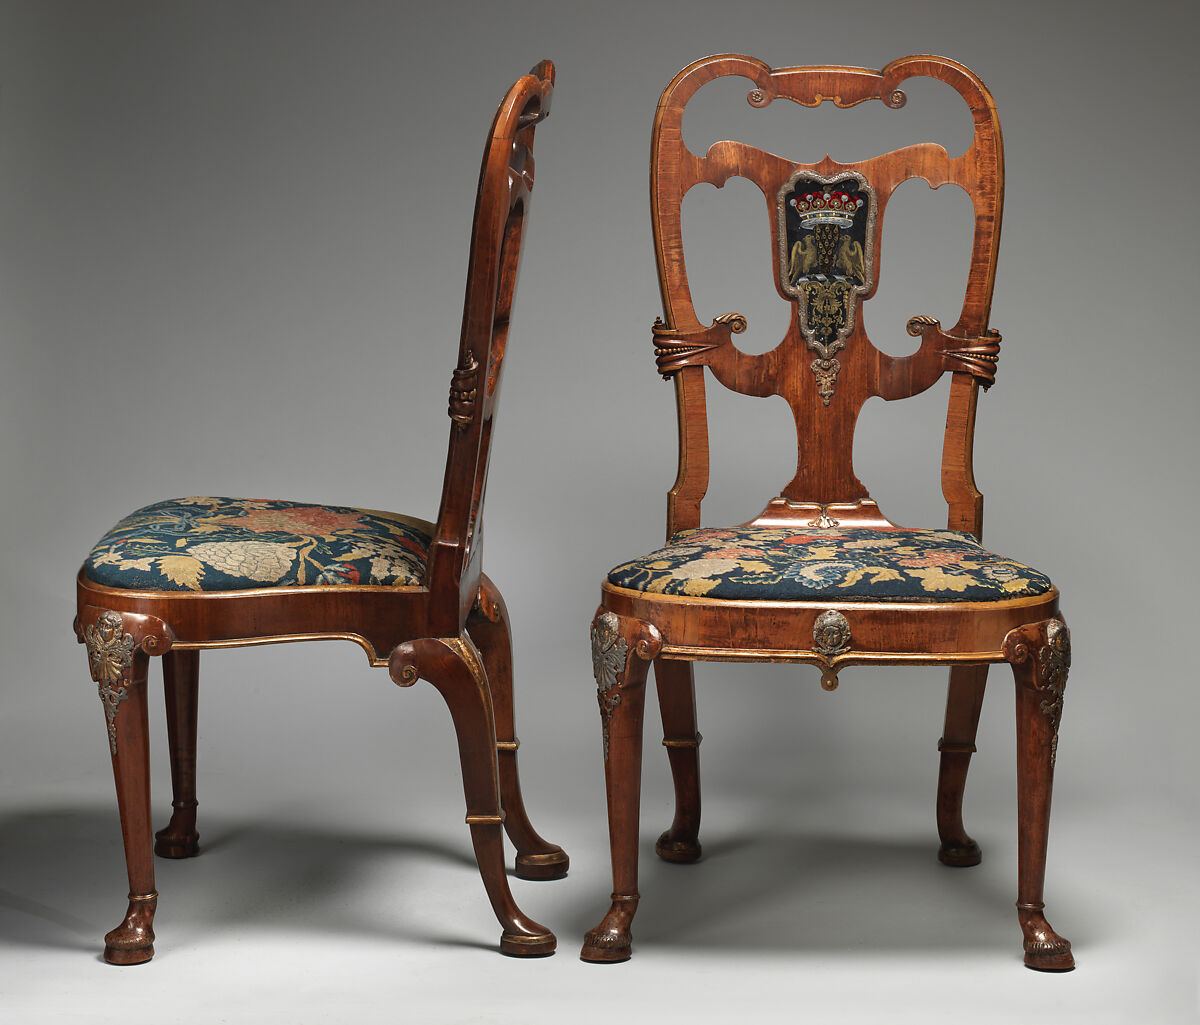 Pair of side chairs, Attributed to Thomas How (British, active 1710–33), Walnut and walnut veneer, parcel-gilt, the seat rails of beech; gilded lead mounts on the knees and front rail; verre églomisé panel mounted on the splat; covered in contemporary tent stitch embroidery on canvas needlework not original to the chair, British 